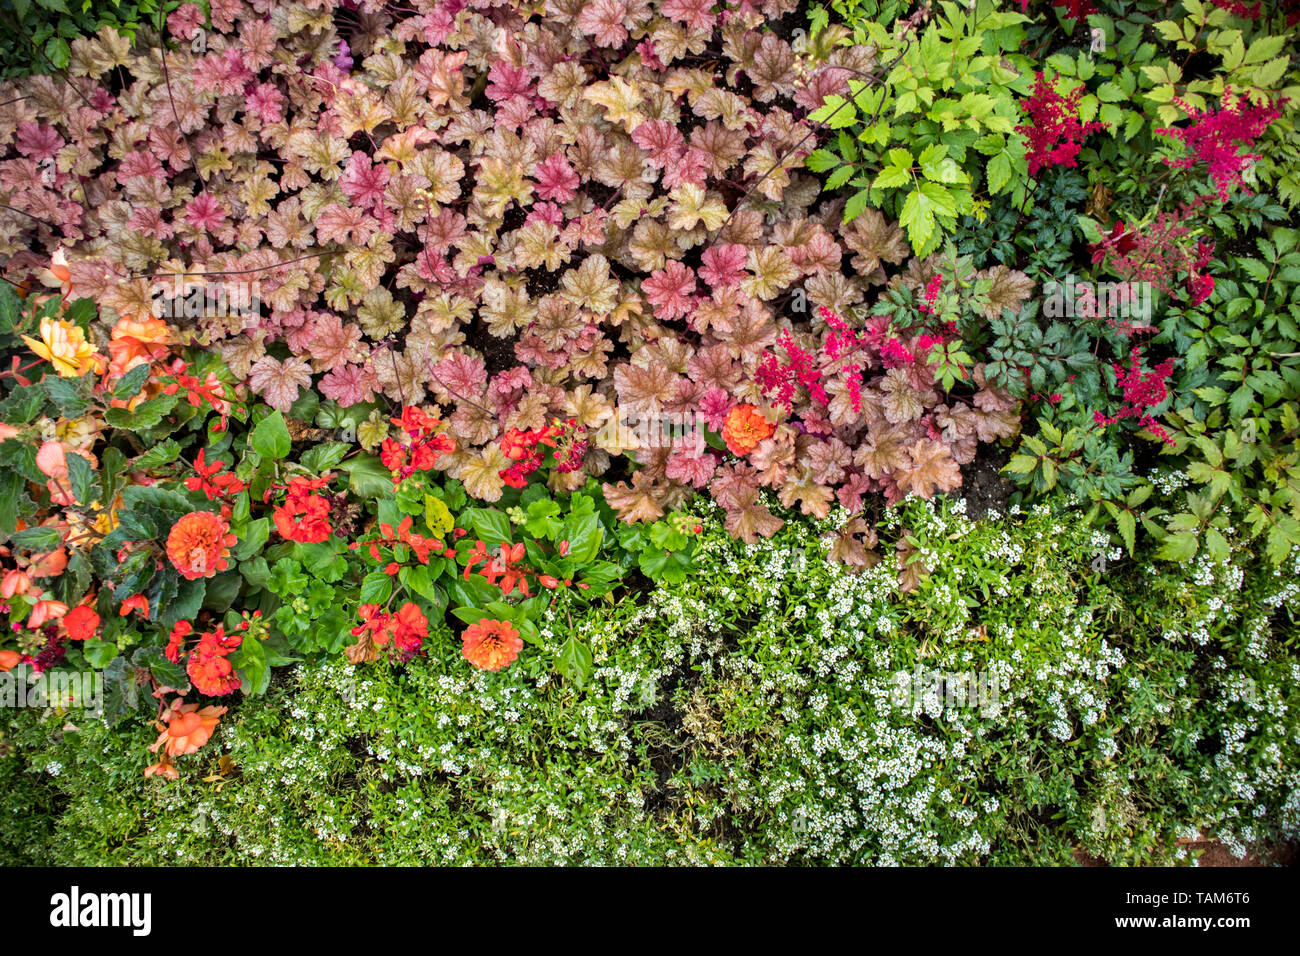 Multicolored flowerbed in the form of geometric shapes Stock Photo